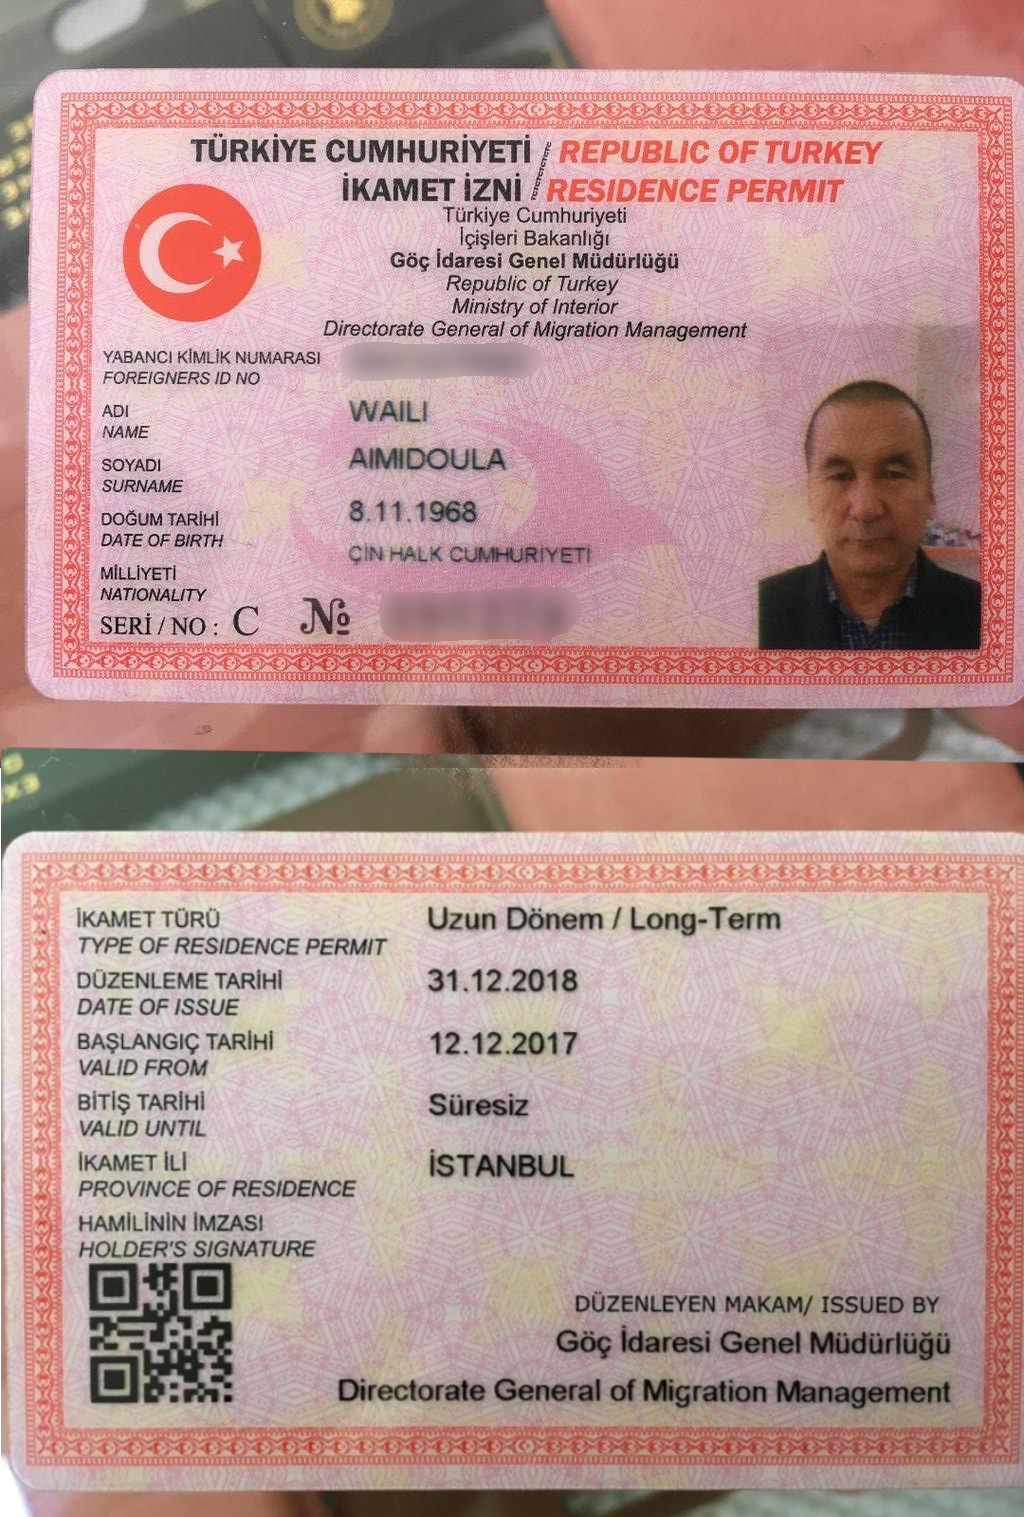 Aimidoula Waili has permanent residency in Turkey but said he could not go to the airport because he fears deportation (Supplied) 